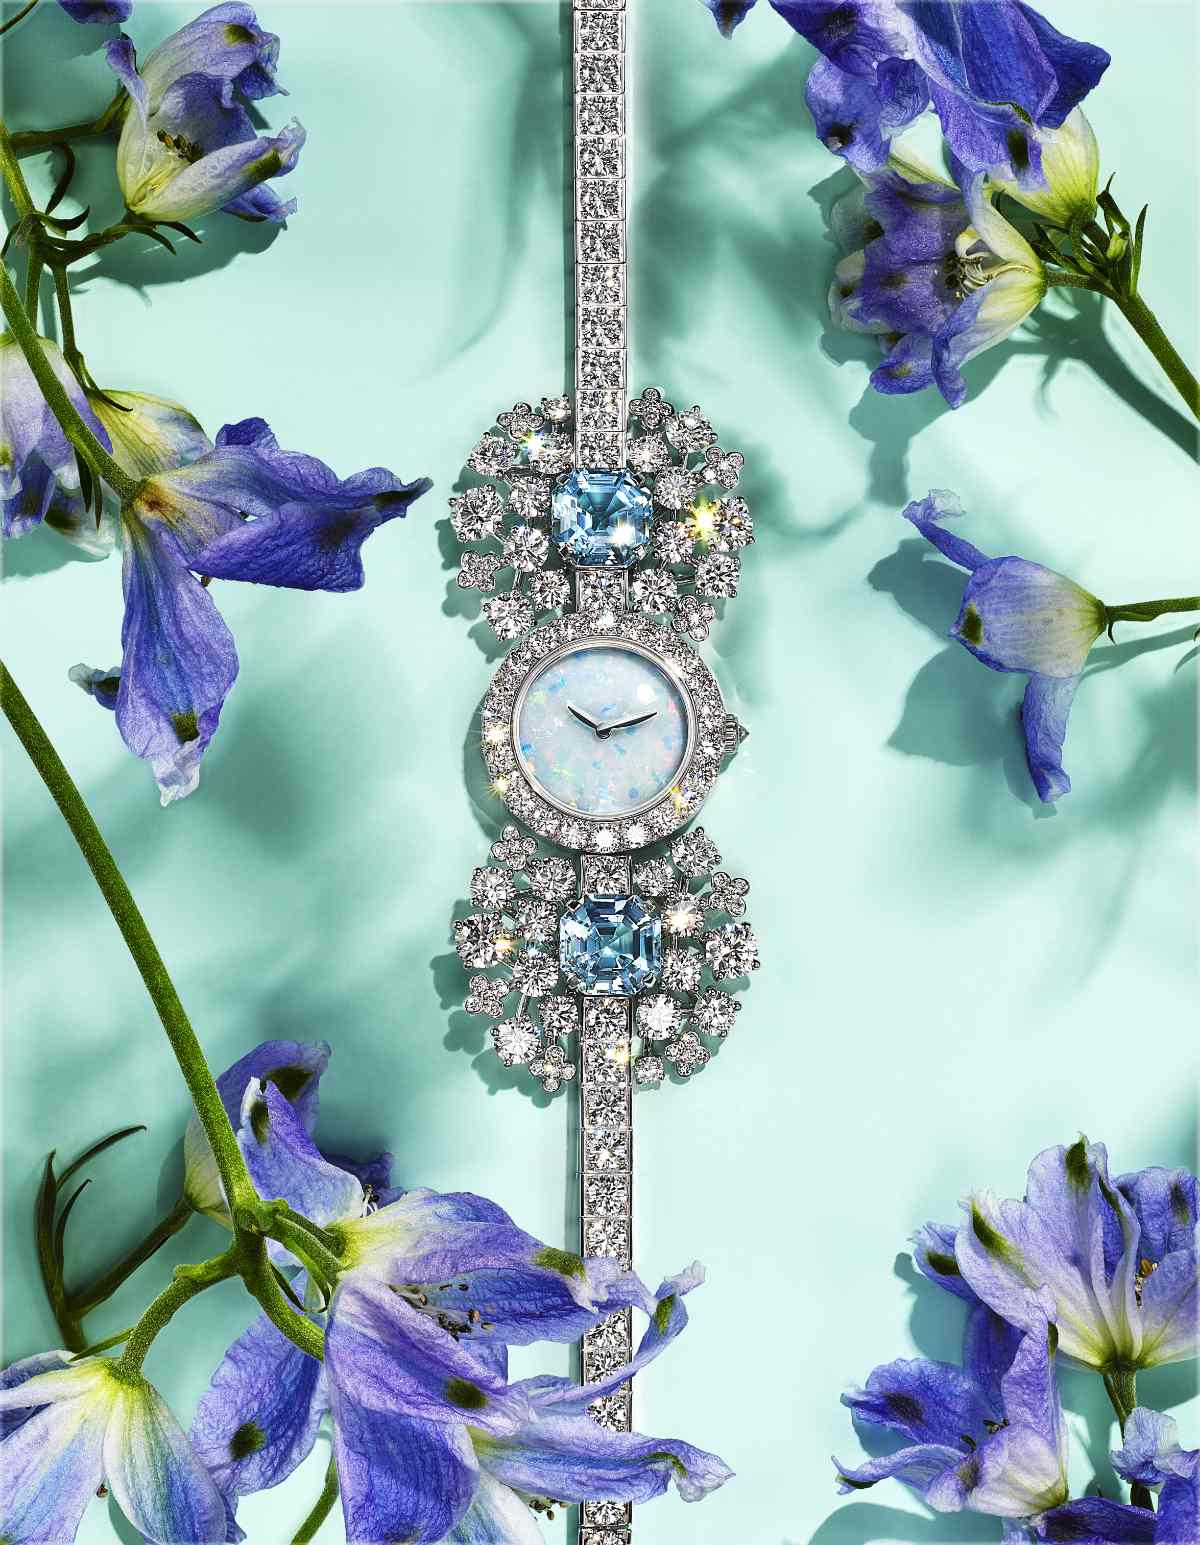 Tiffany & Co. Introduces New Floral-inspired Masterworks For Its BOTANICA